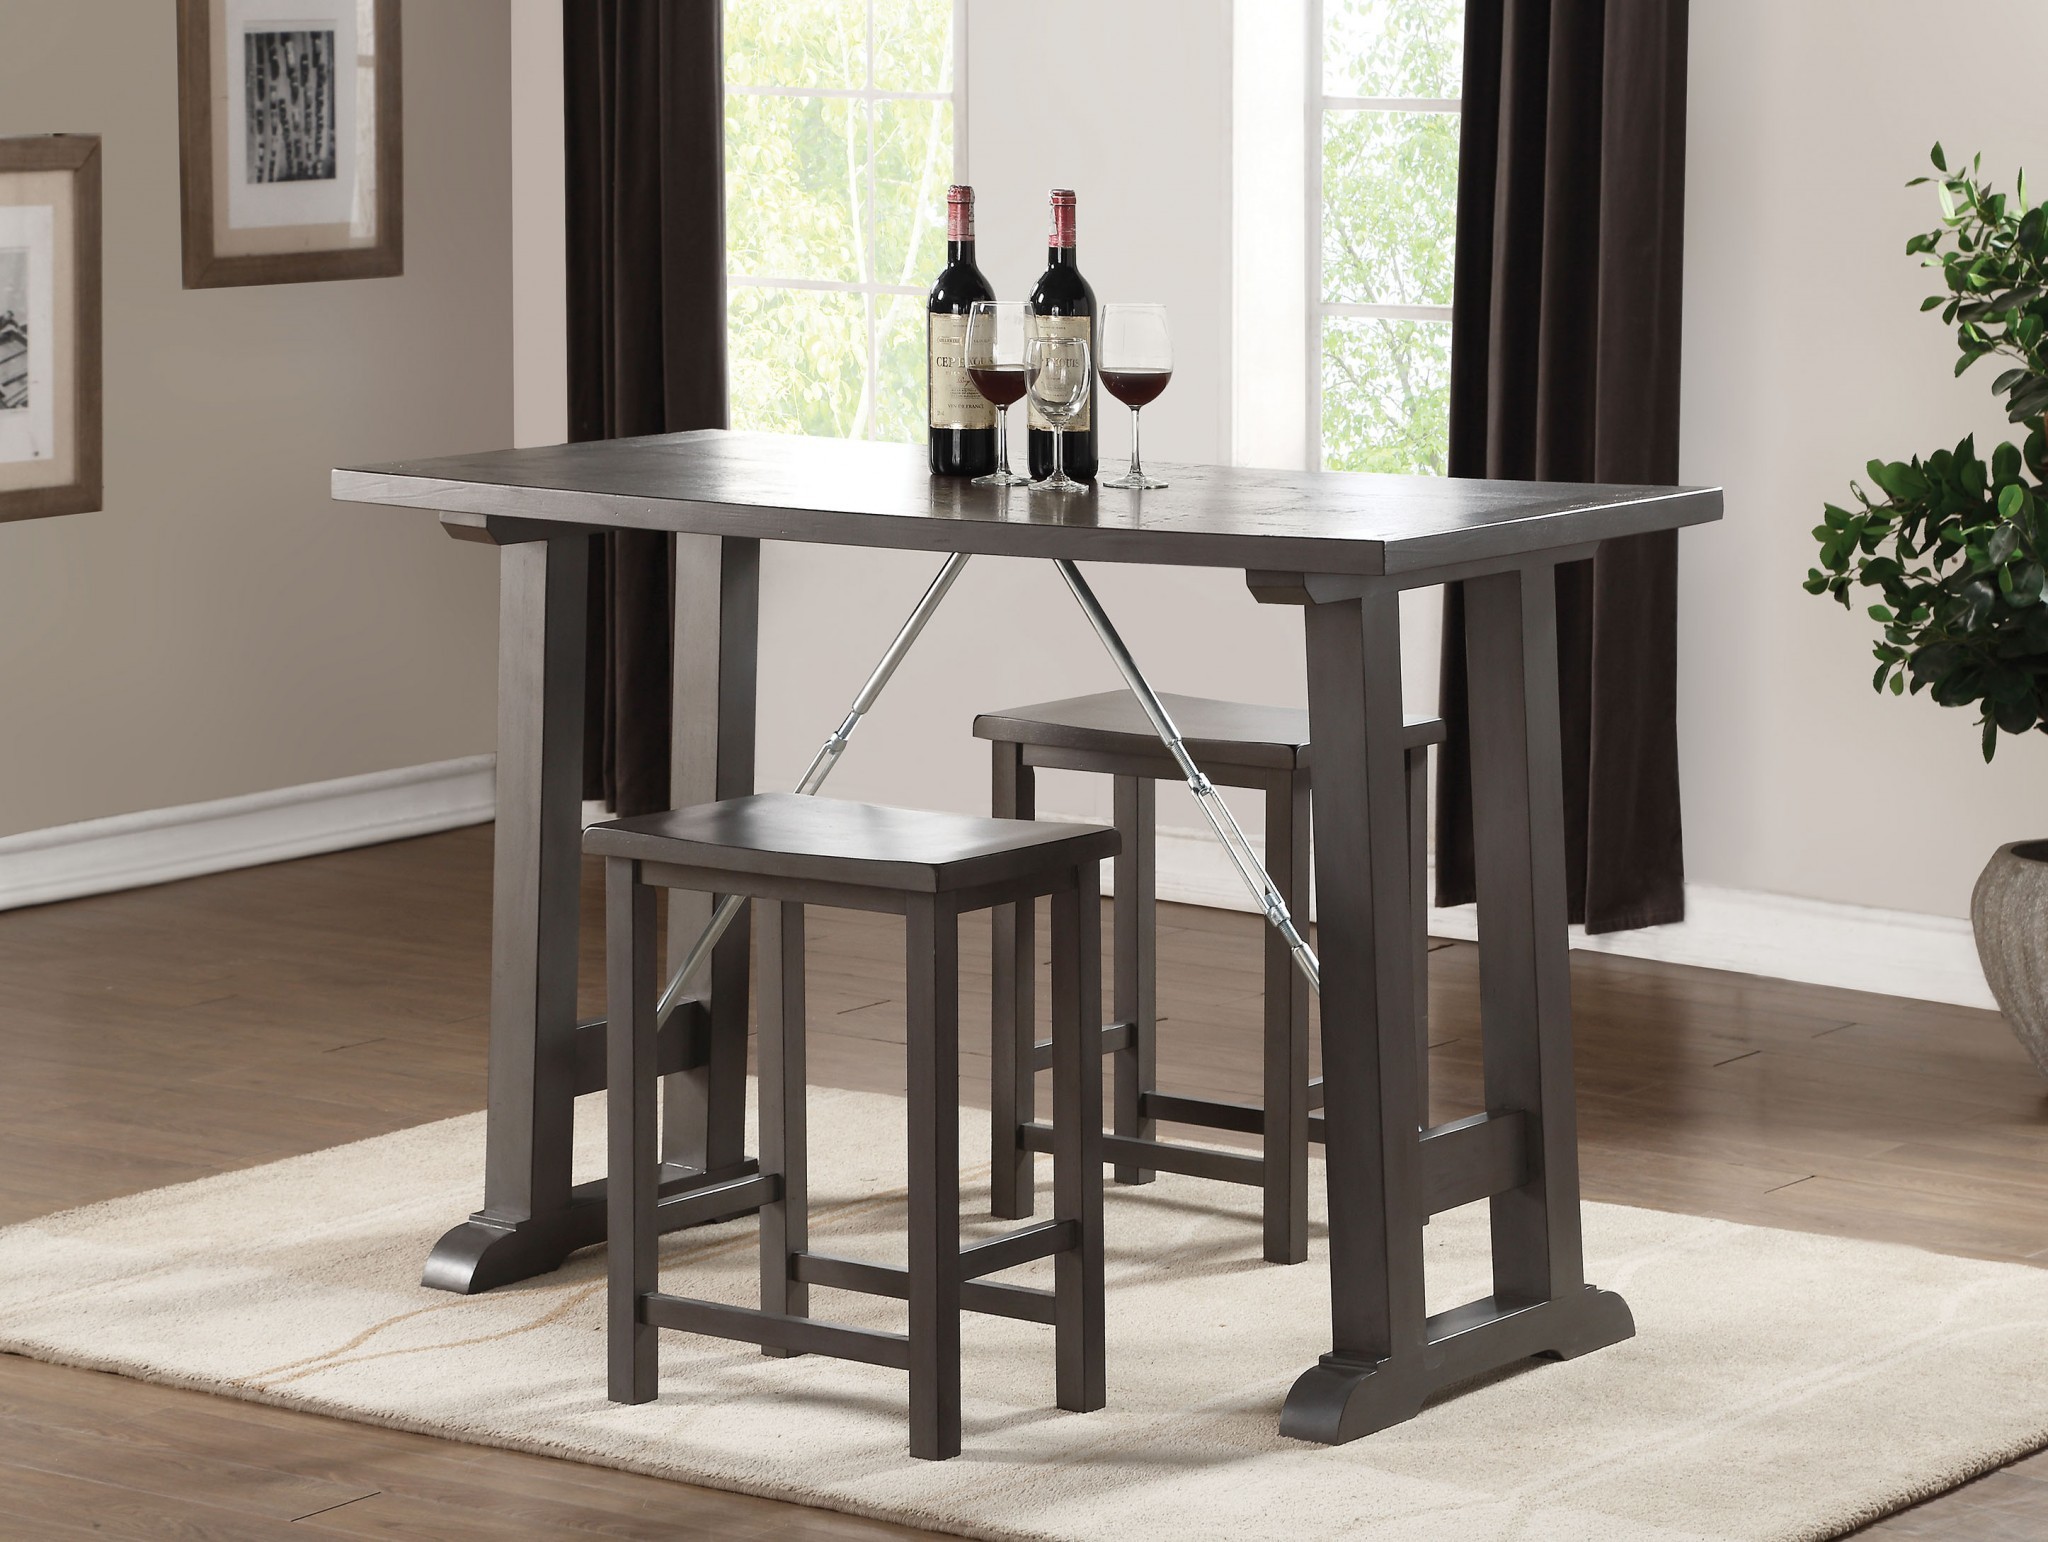 3 Piece Wooden Counter Height Set In Gray Oak & Chrome